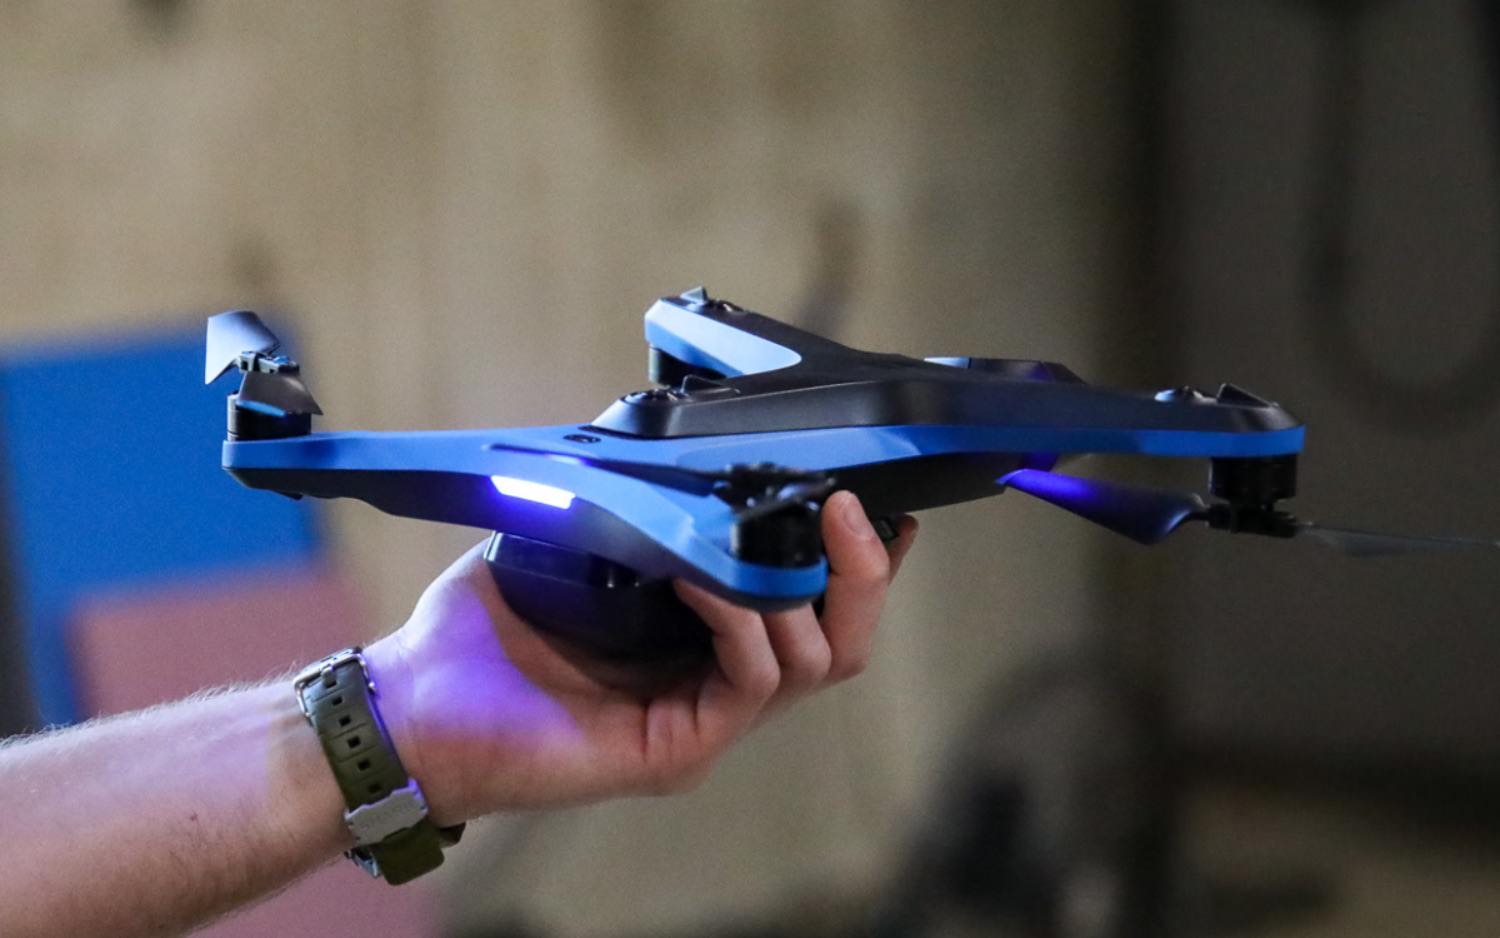 Skydio COO: "Drones are the next generation of what cameras should be"